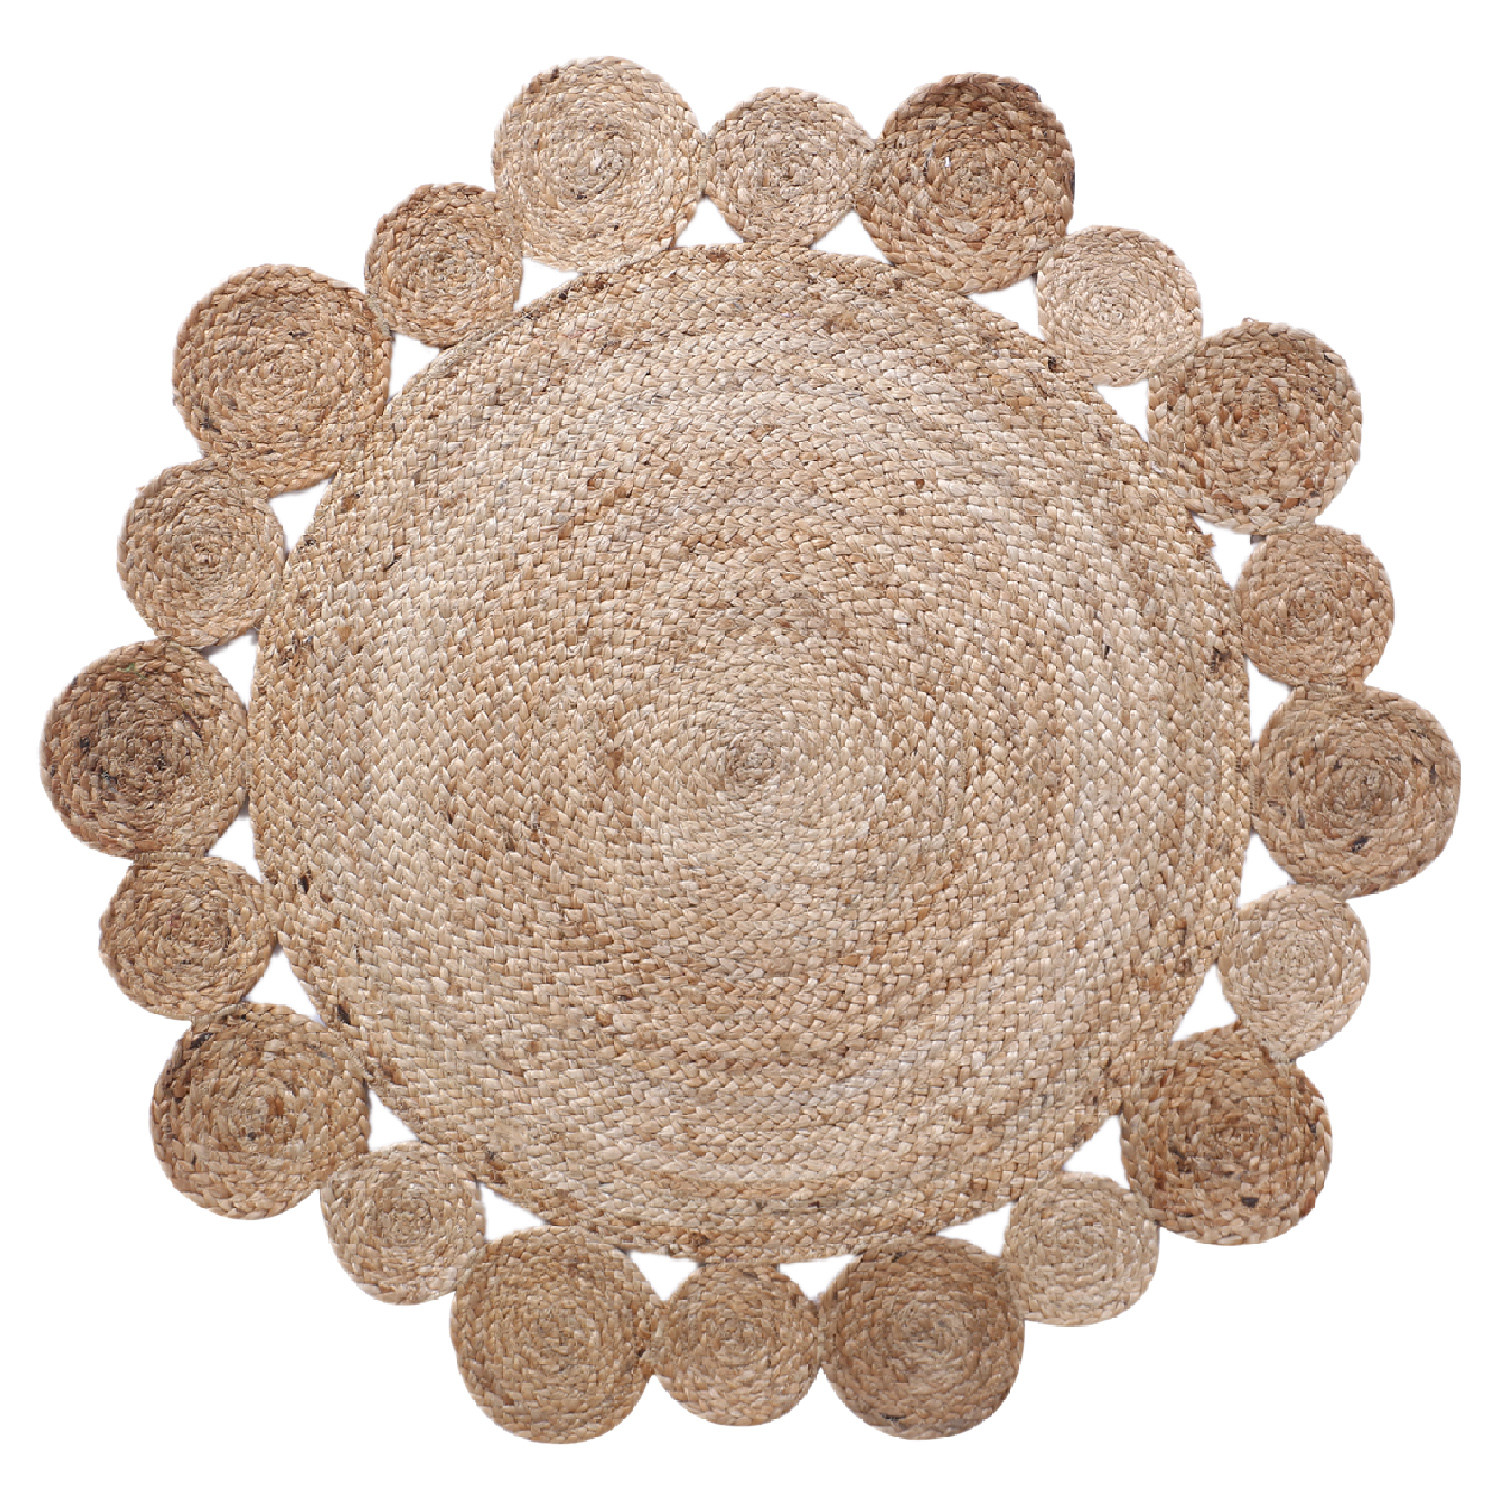 Kuber Industries Hand Woven Carpet Rugs|Natural Braided Jute Door mat|Multi Round Circle Mat For Bedroom,Living Room,Dining Room,Yoga,66x66 cm,(Brown)